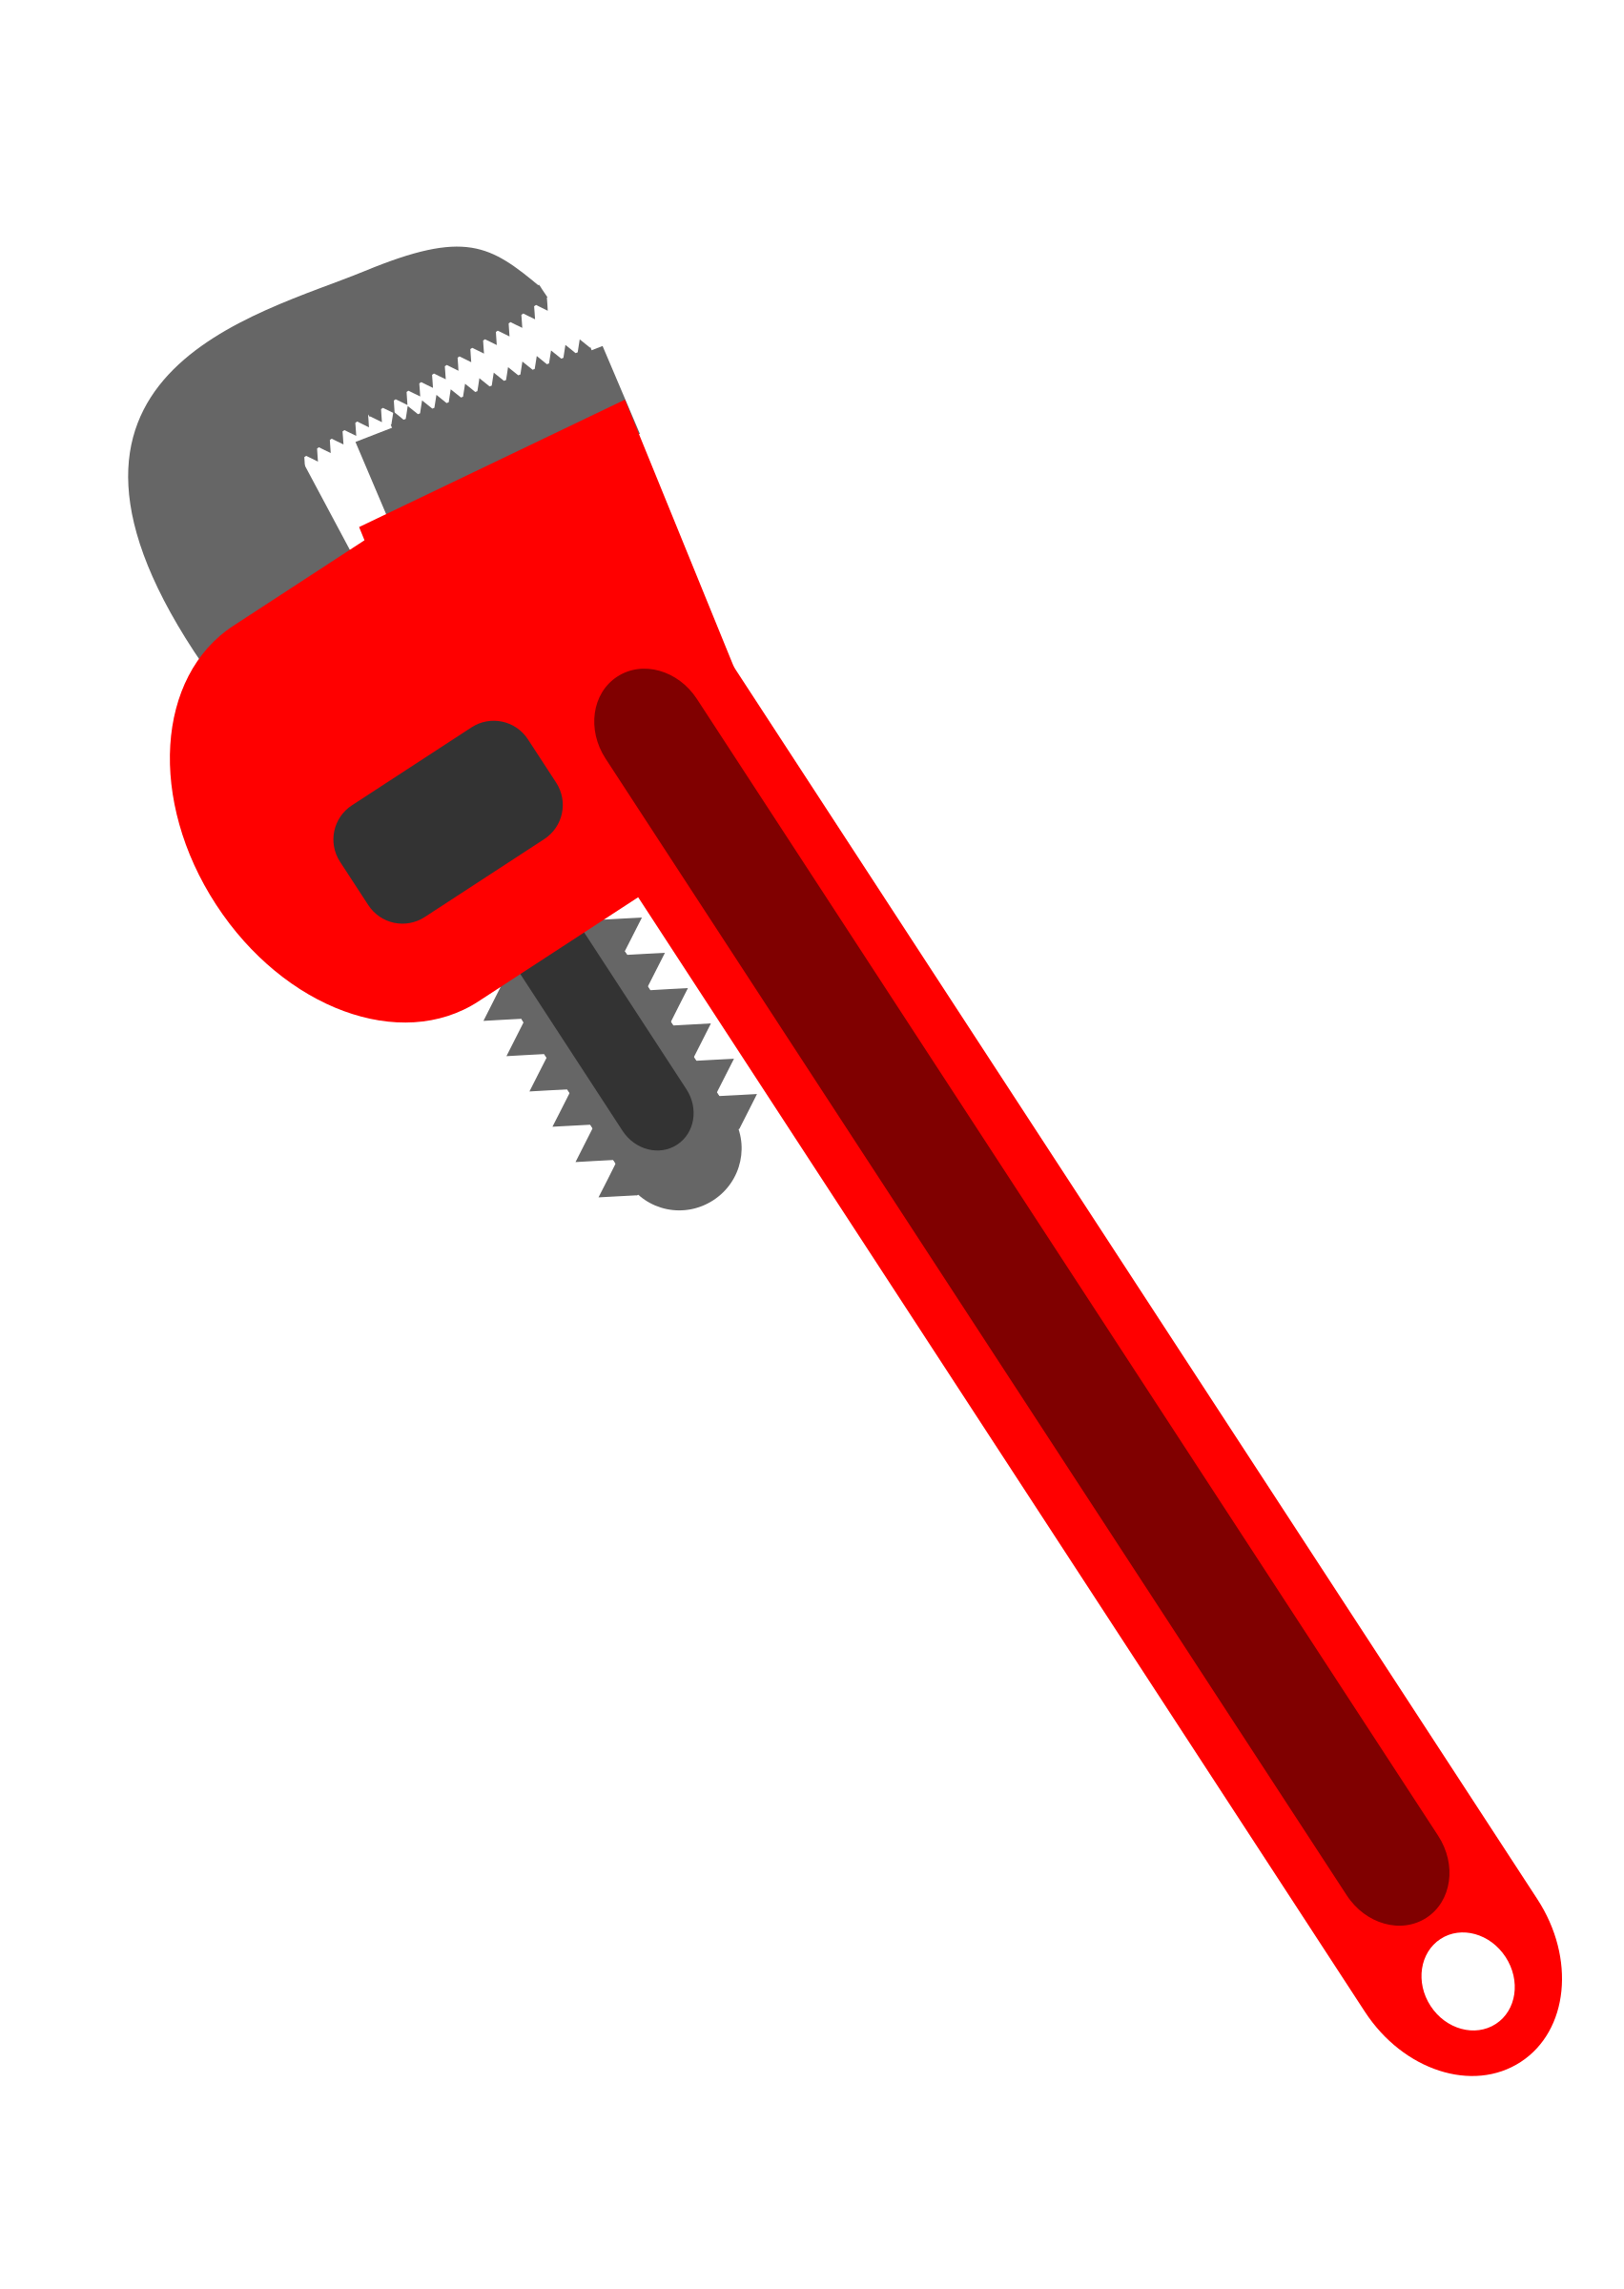 Wrench decoration ideas muskox. Faucet clipart plumbing tool